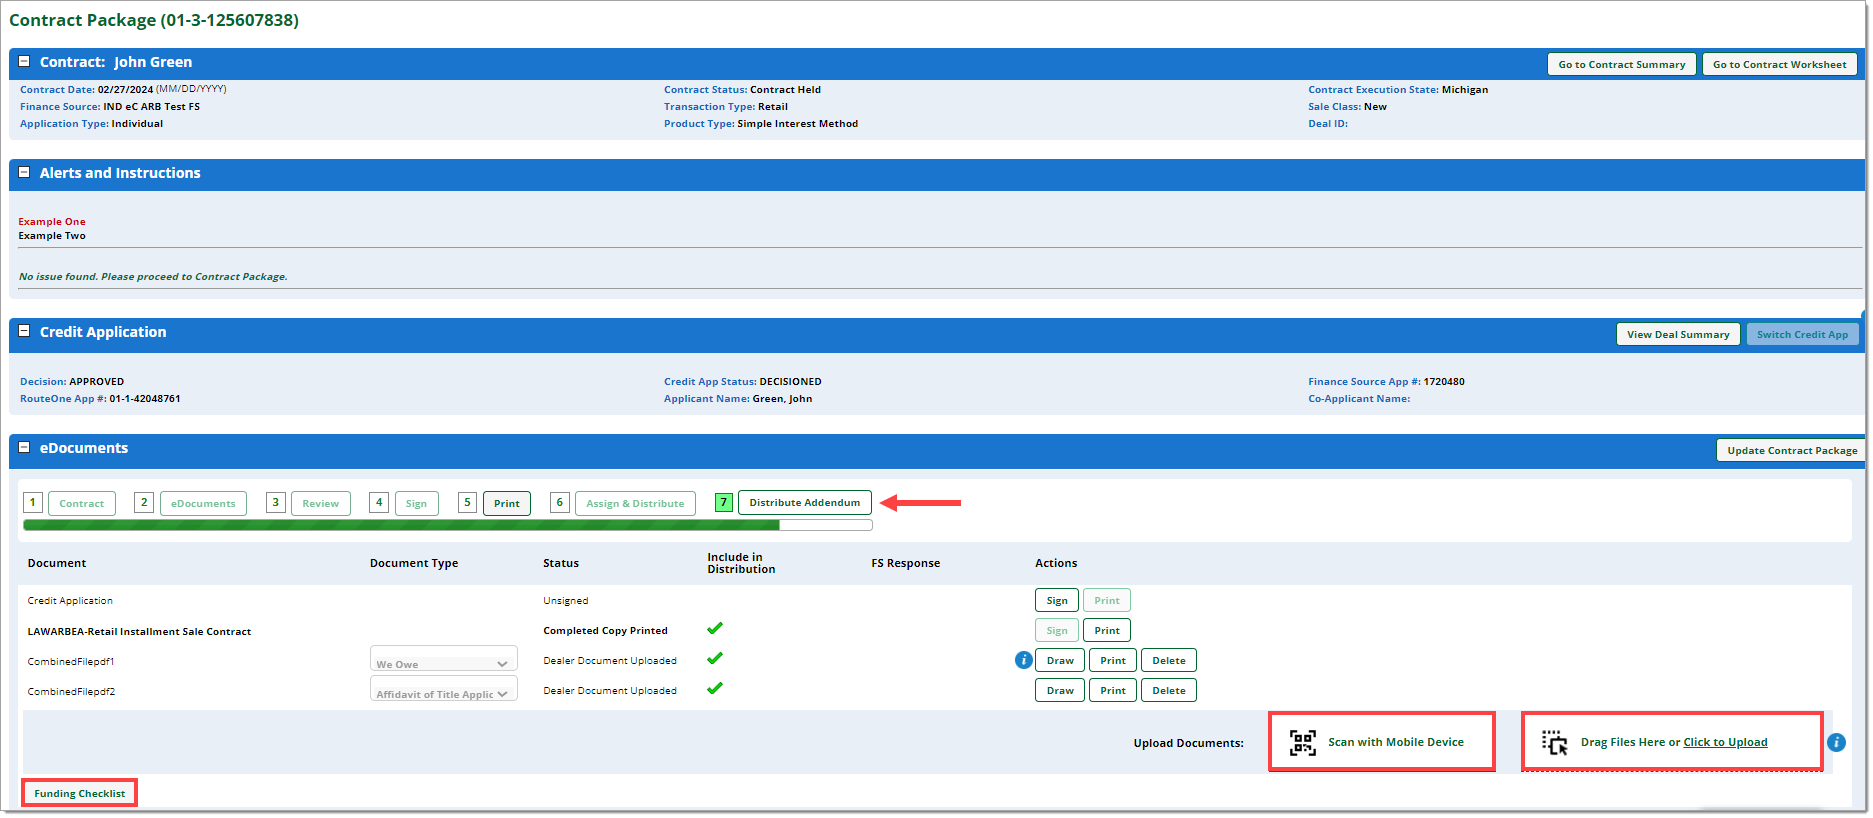 The Contract Package page with an arrow the ‘Distribute Addendum’ button above the eDocuments progress bar and boxes highlighting the ‘Funding Checklist,’ ‘Scan with Mobile Device,’ and ‘Drag Here or Click to Upload’ buttons at the bottom of the eDocuments section.